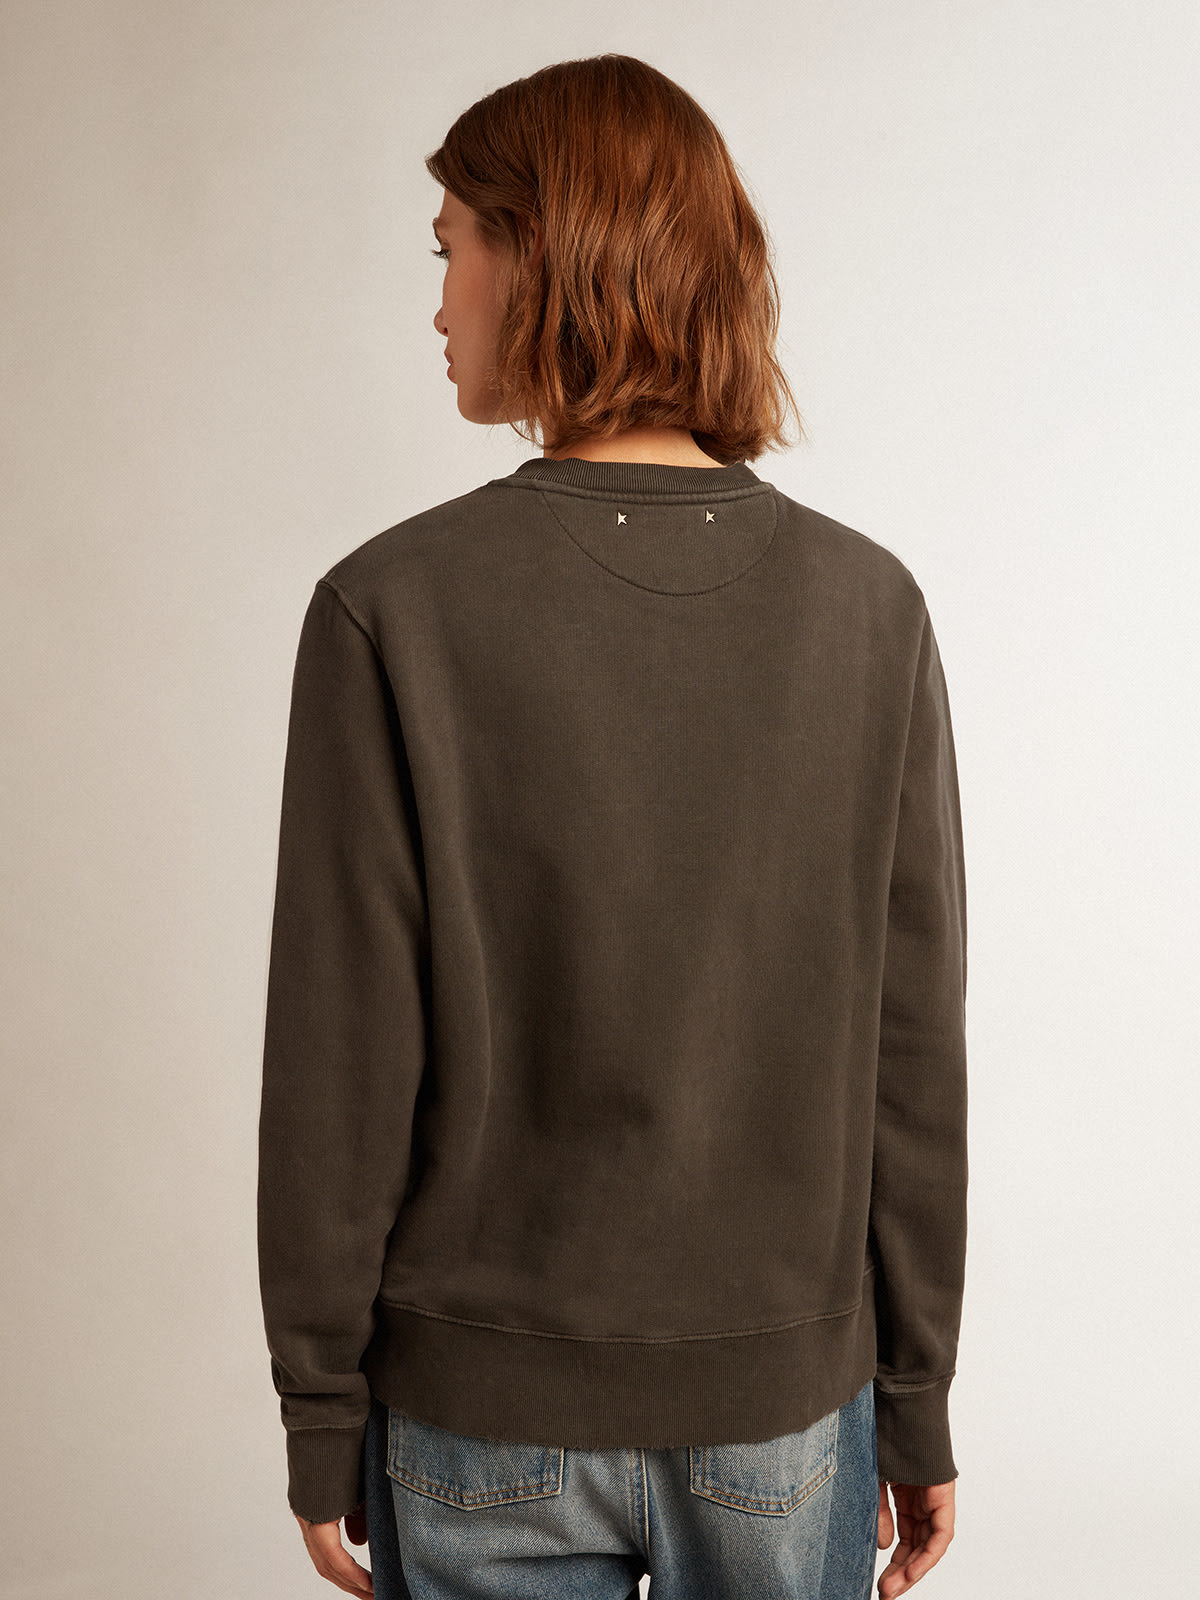 Golden Goose - Sweat-shirt Golden Collection gris anthracite avec cristaux cabochons in 